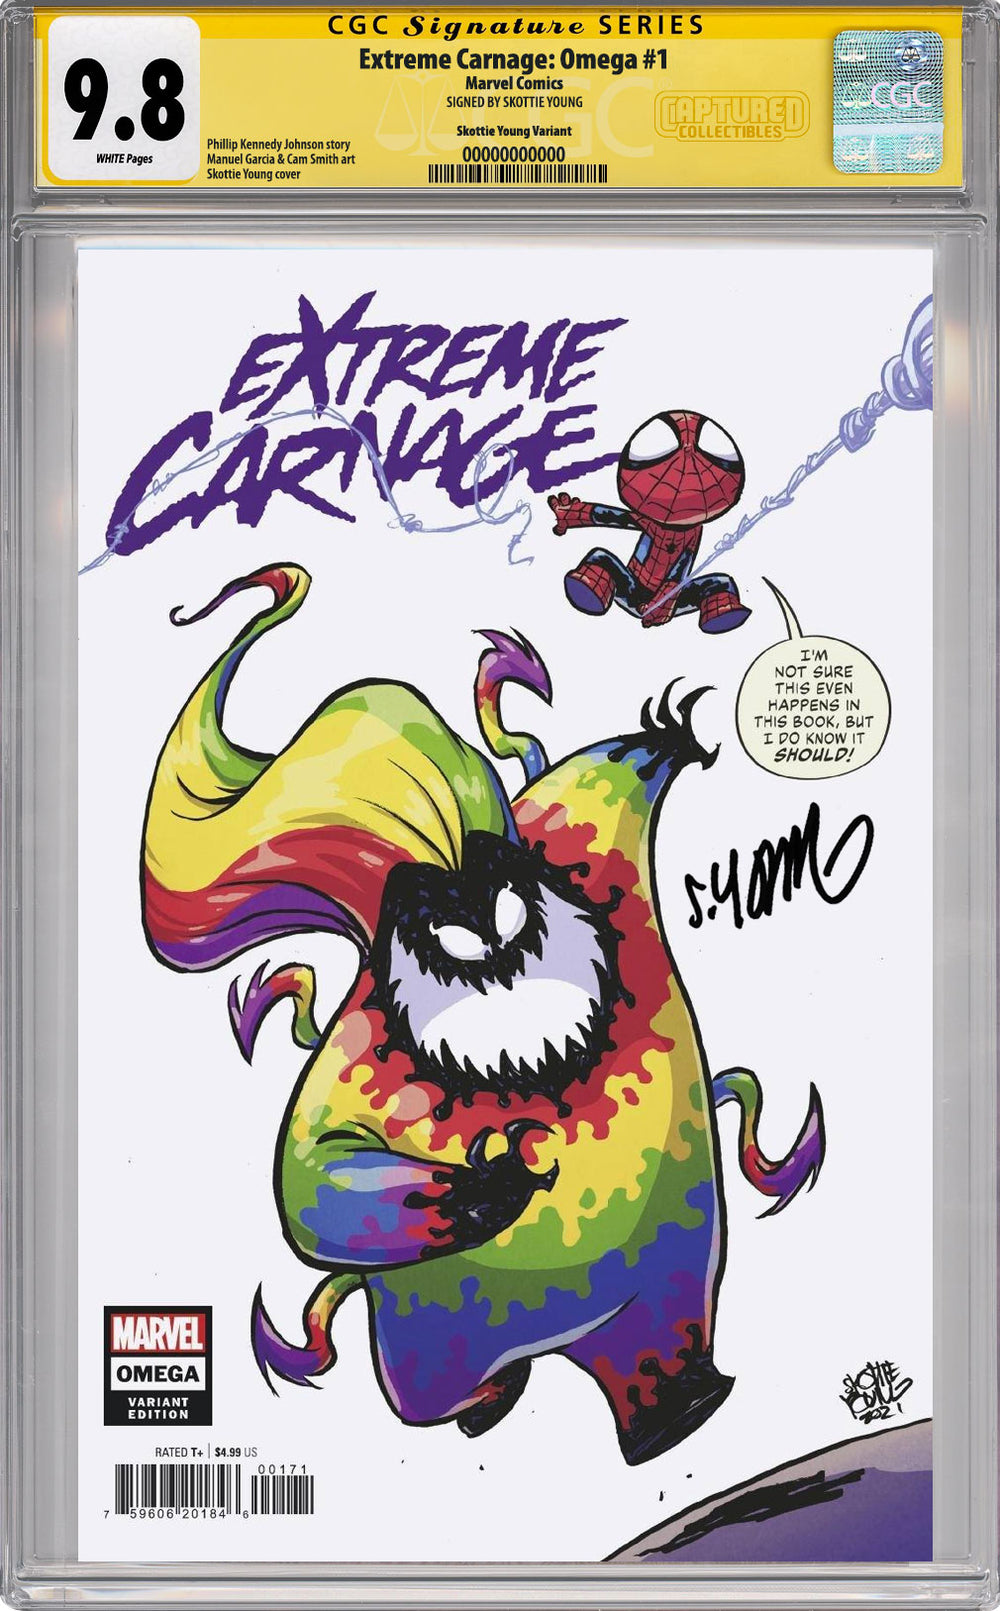 Extreme Carnage: Omega #1 Variant CGC SS 9.8 Signed by Skottie Young